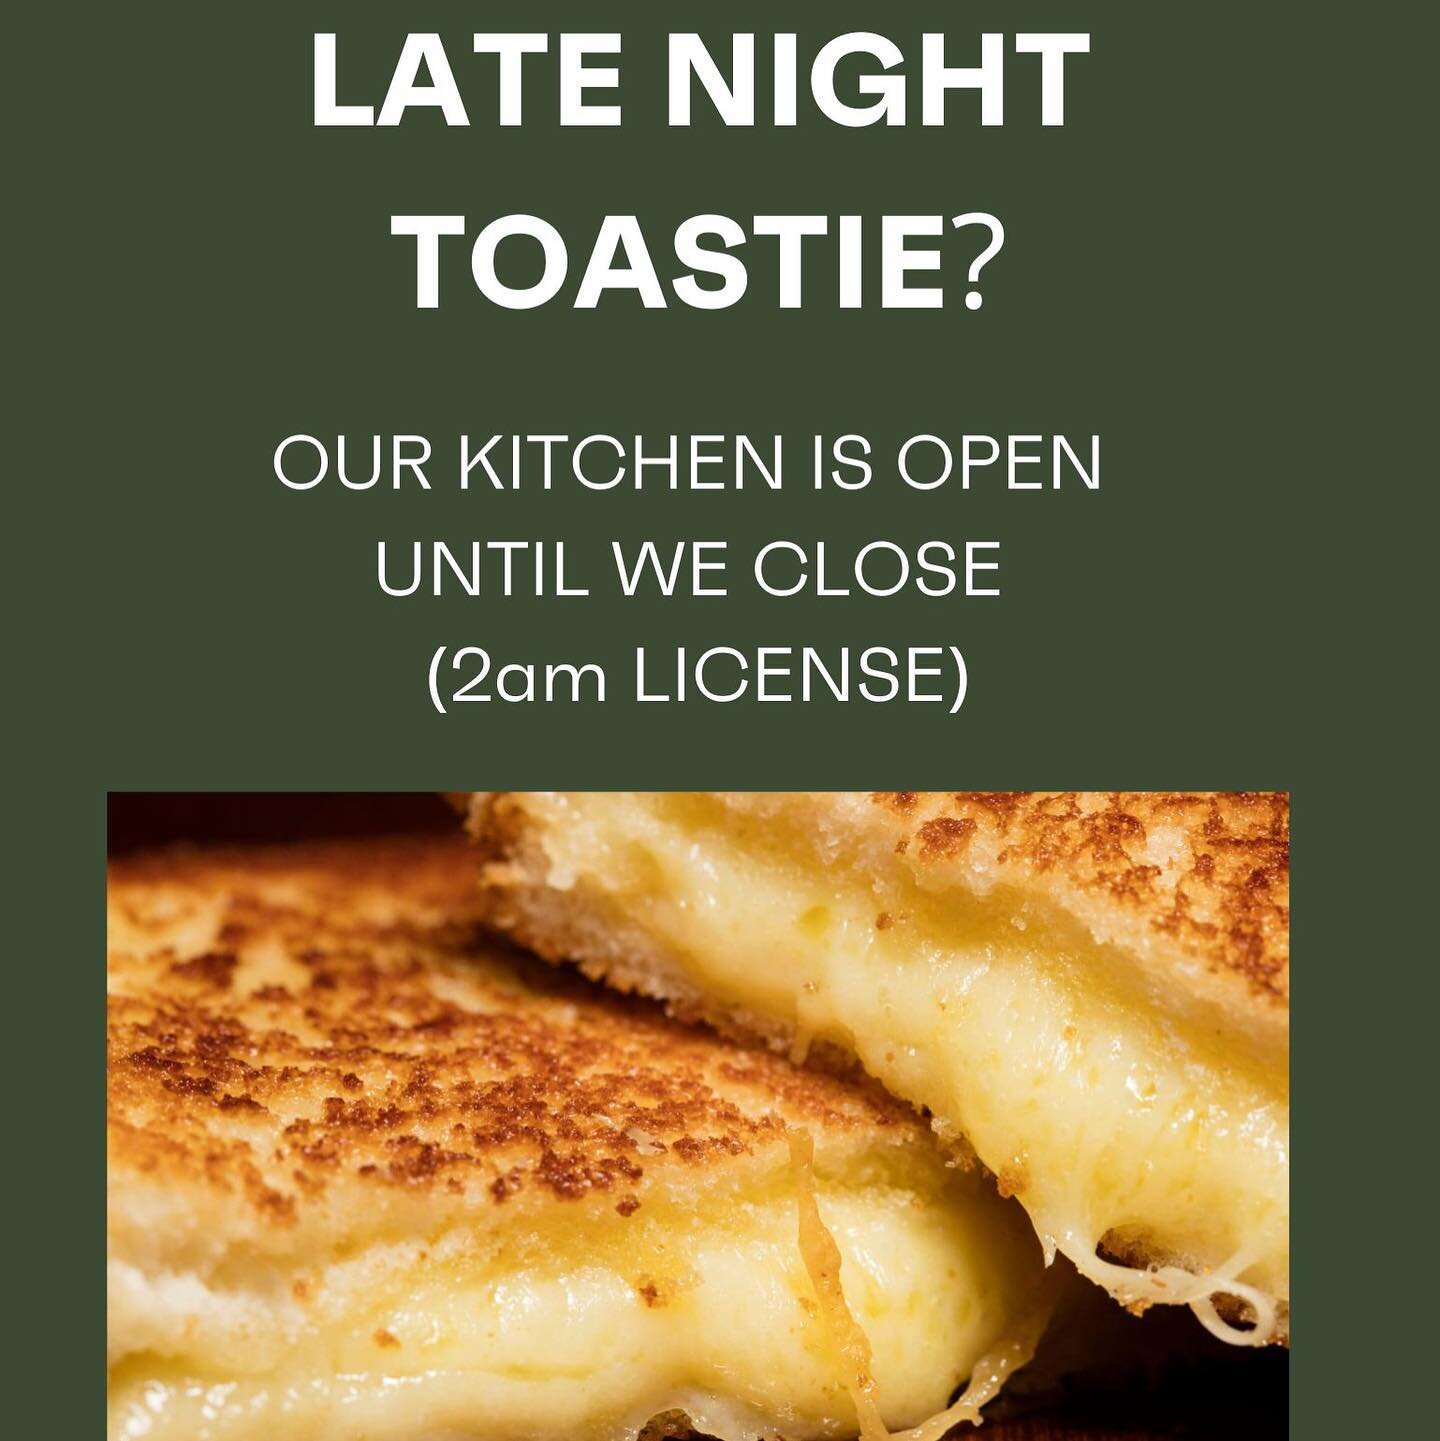 We have some exciting new toasties on our late night food menu.

Our Ruben with texas smoked brisket is delicious!

Try our fried chicken with pesto and Swiss cheese or our Suzi Quattro cheese too!

Discover something new at BarNone.

#discovernew #d